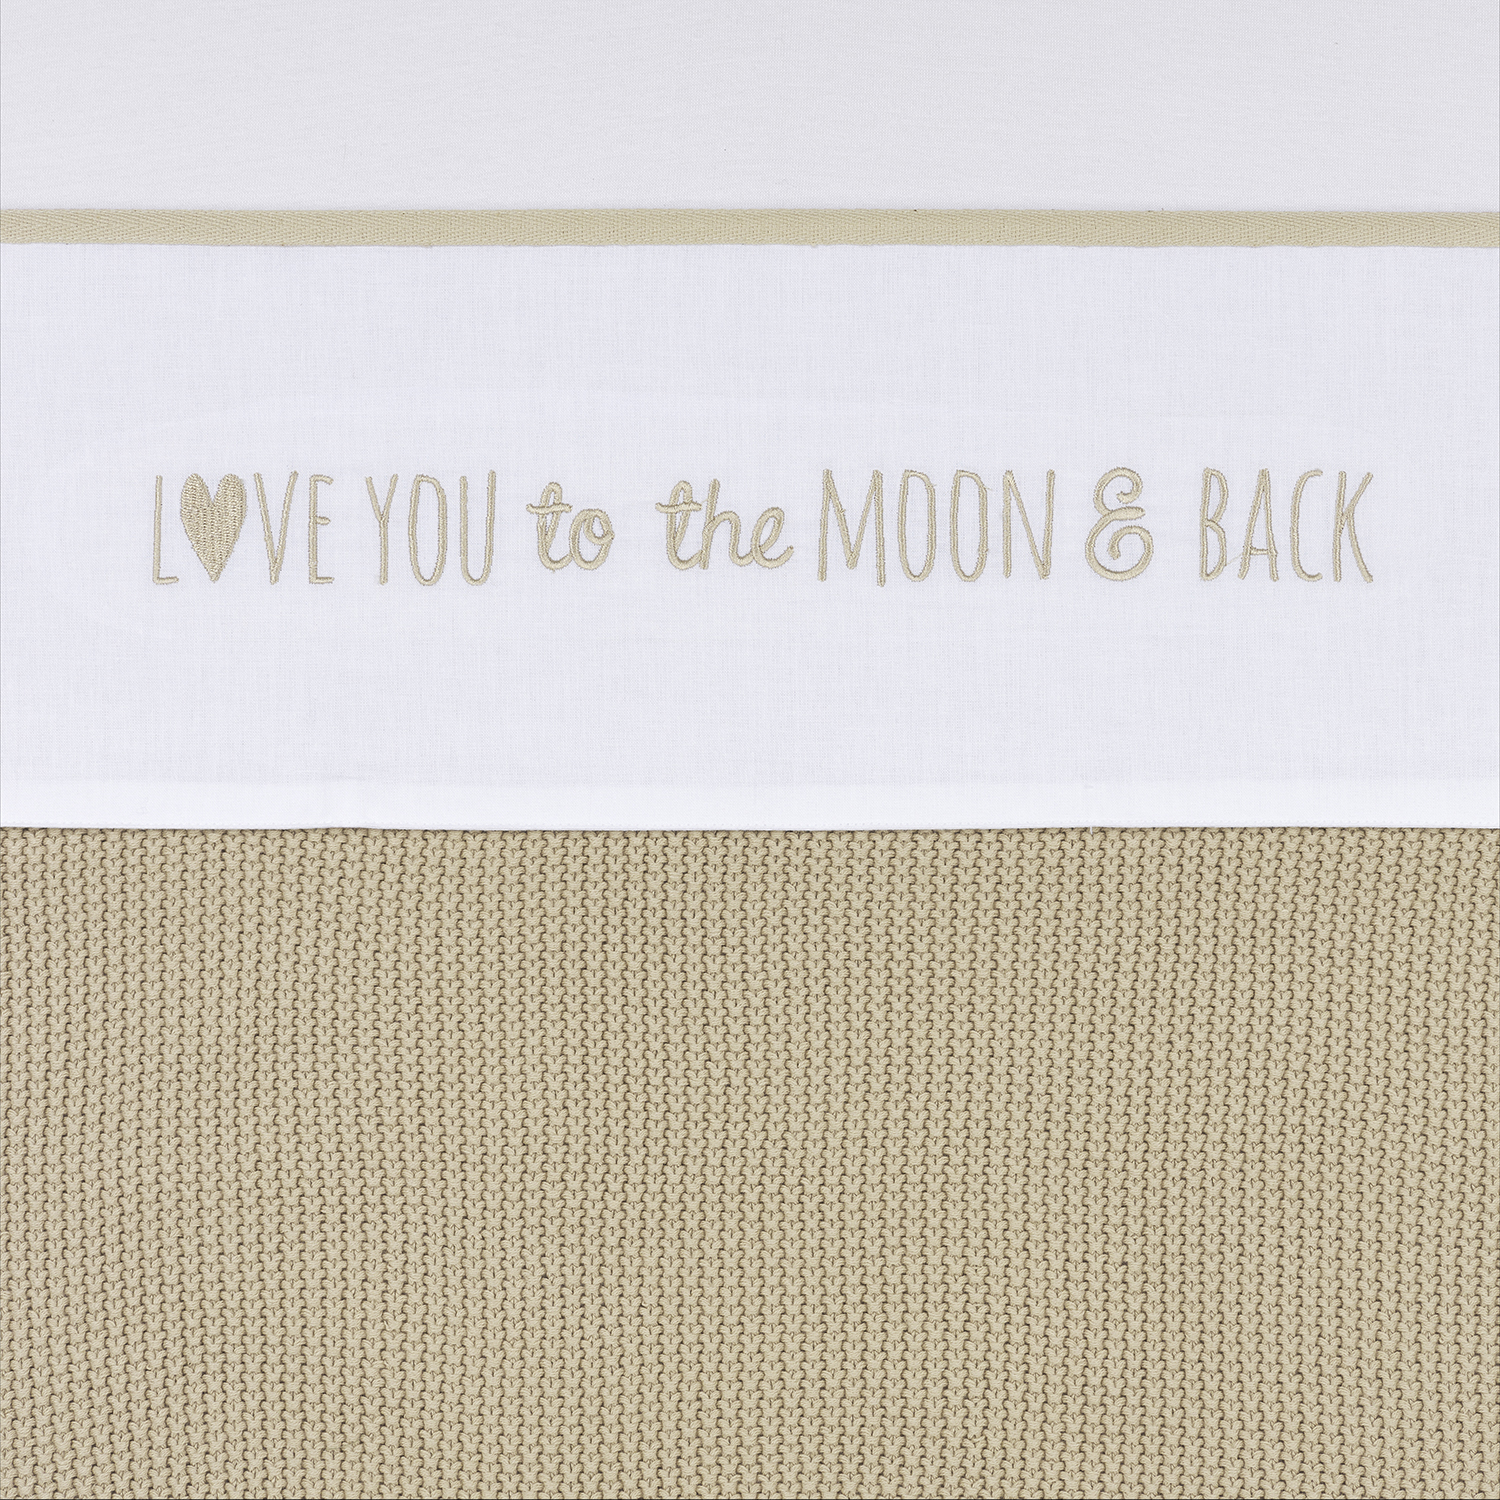 Cot bed sheet Love you to the moon & back - sand - 100x150cm